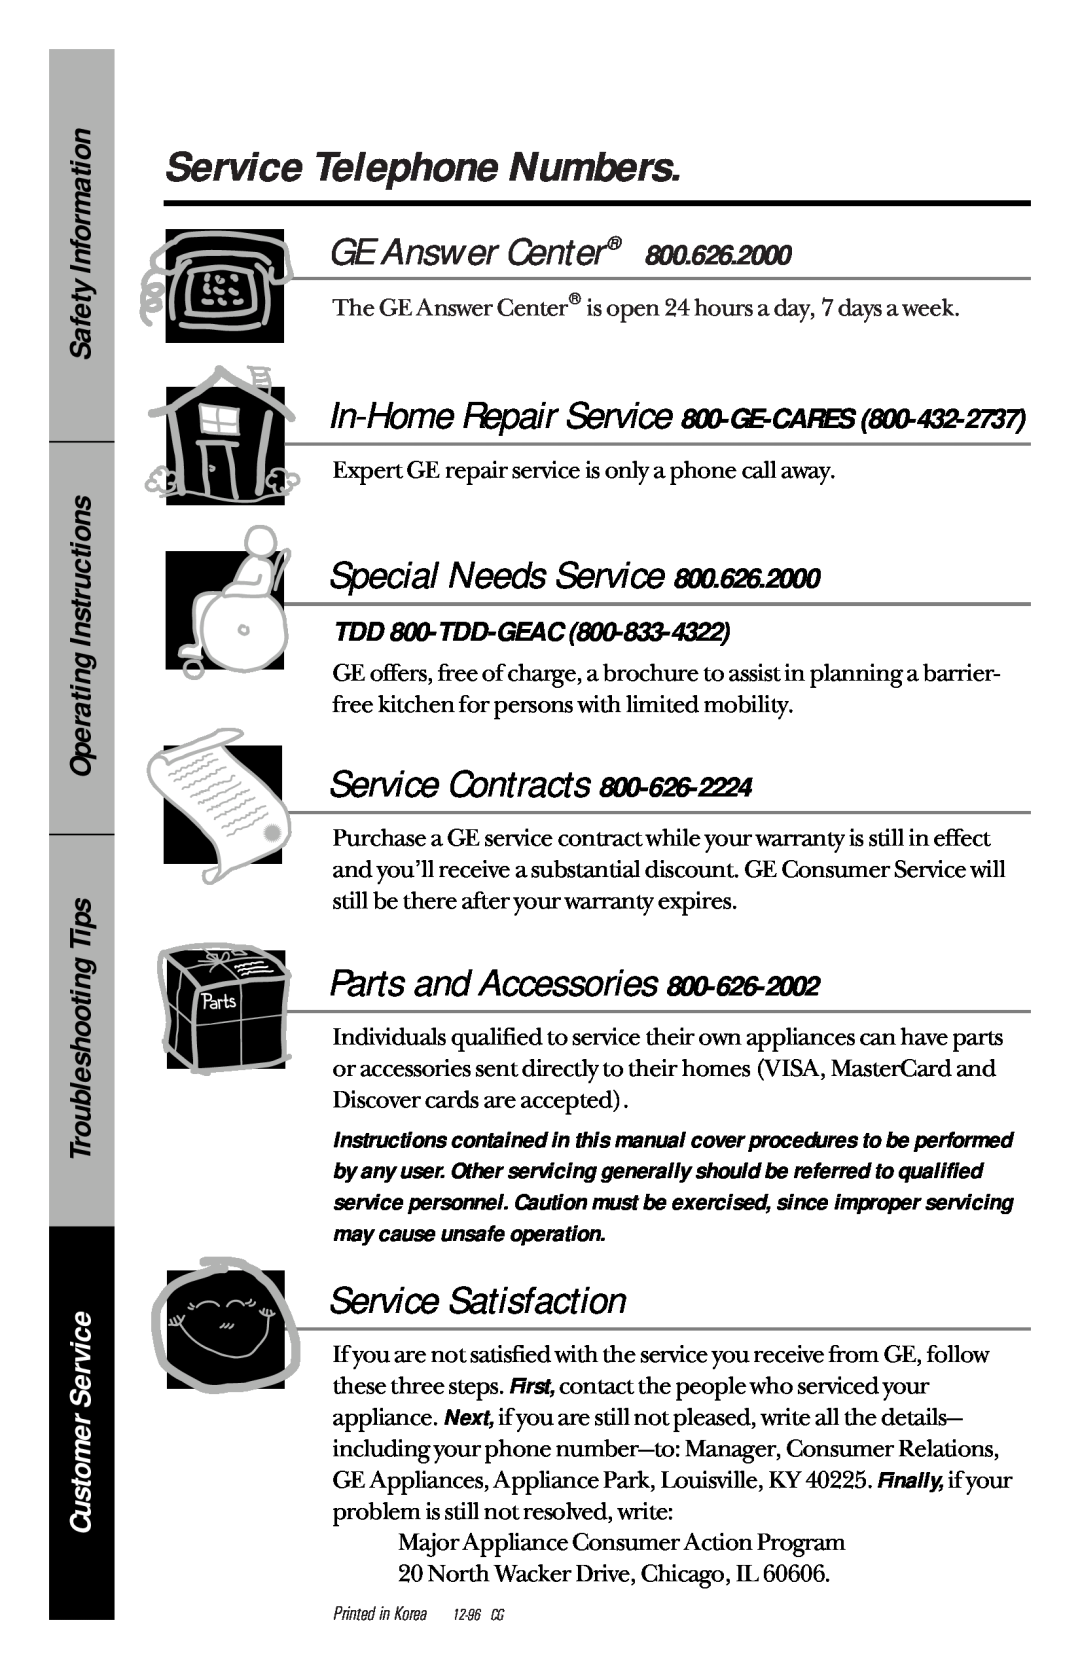 GE je1540 owner manual Service Telephone Numbers, In-HomeRepair Service 800-GE-CARES, TDD 800-TDD-GEAC, GE Answer Center 